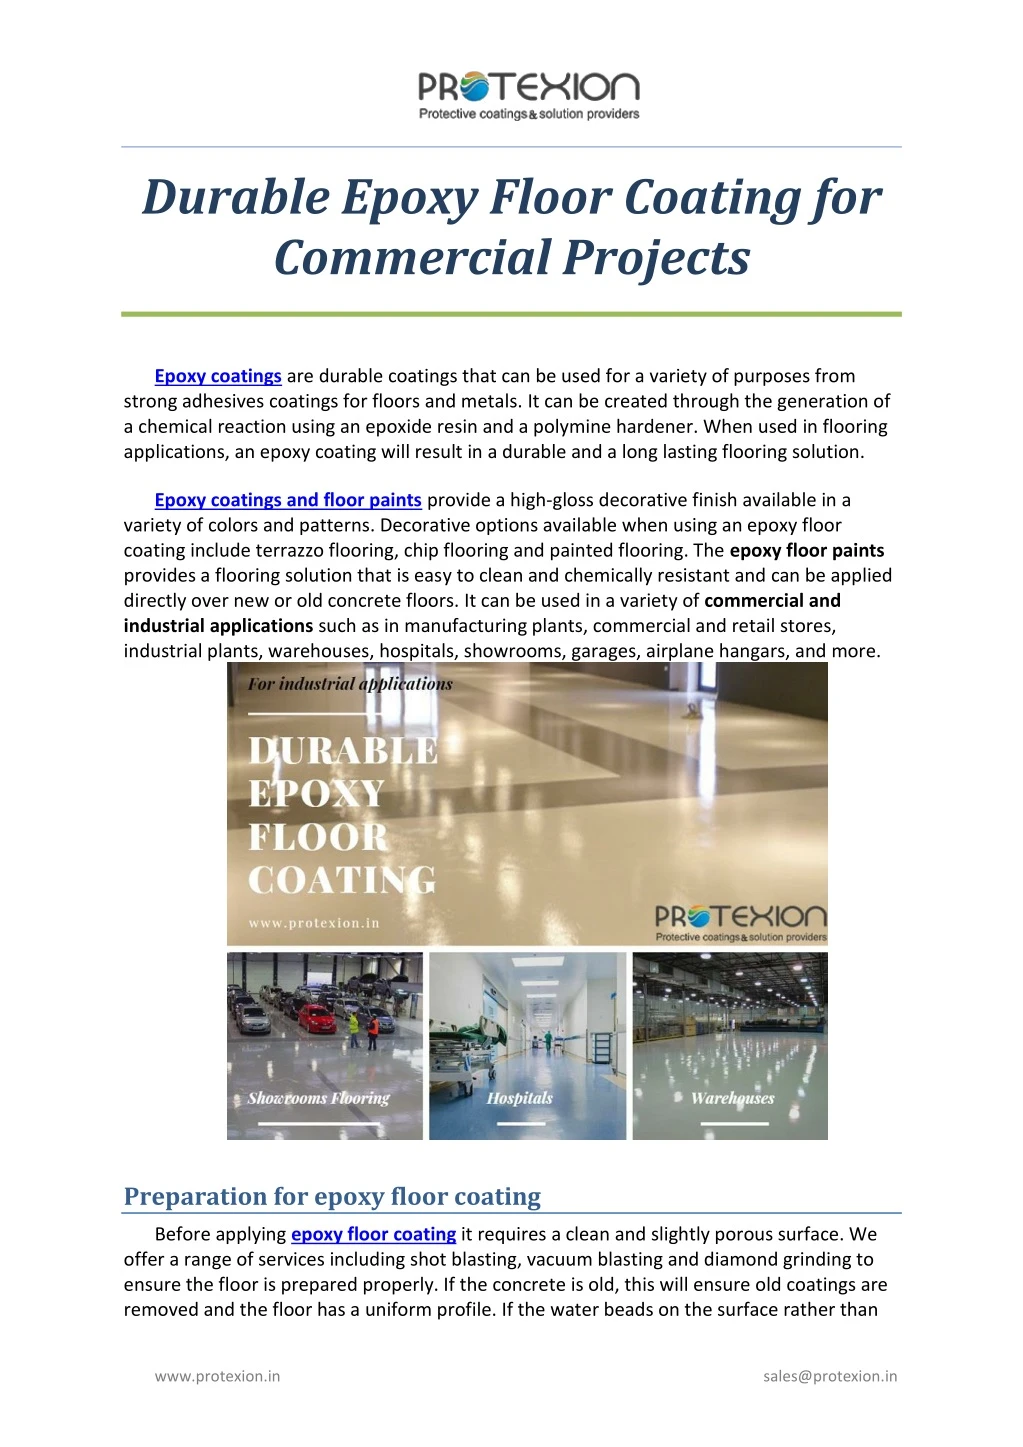 durable epoxy floor coating for commercial